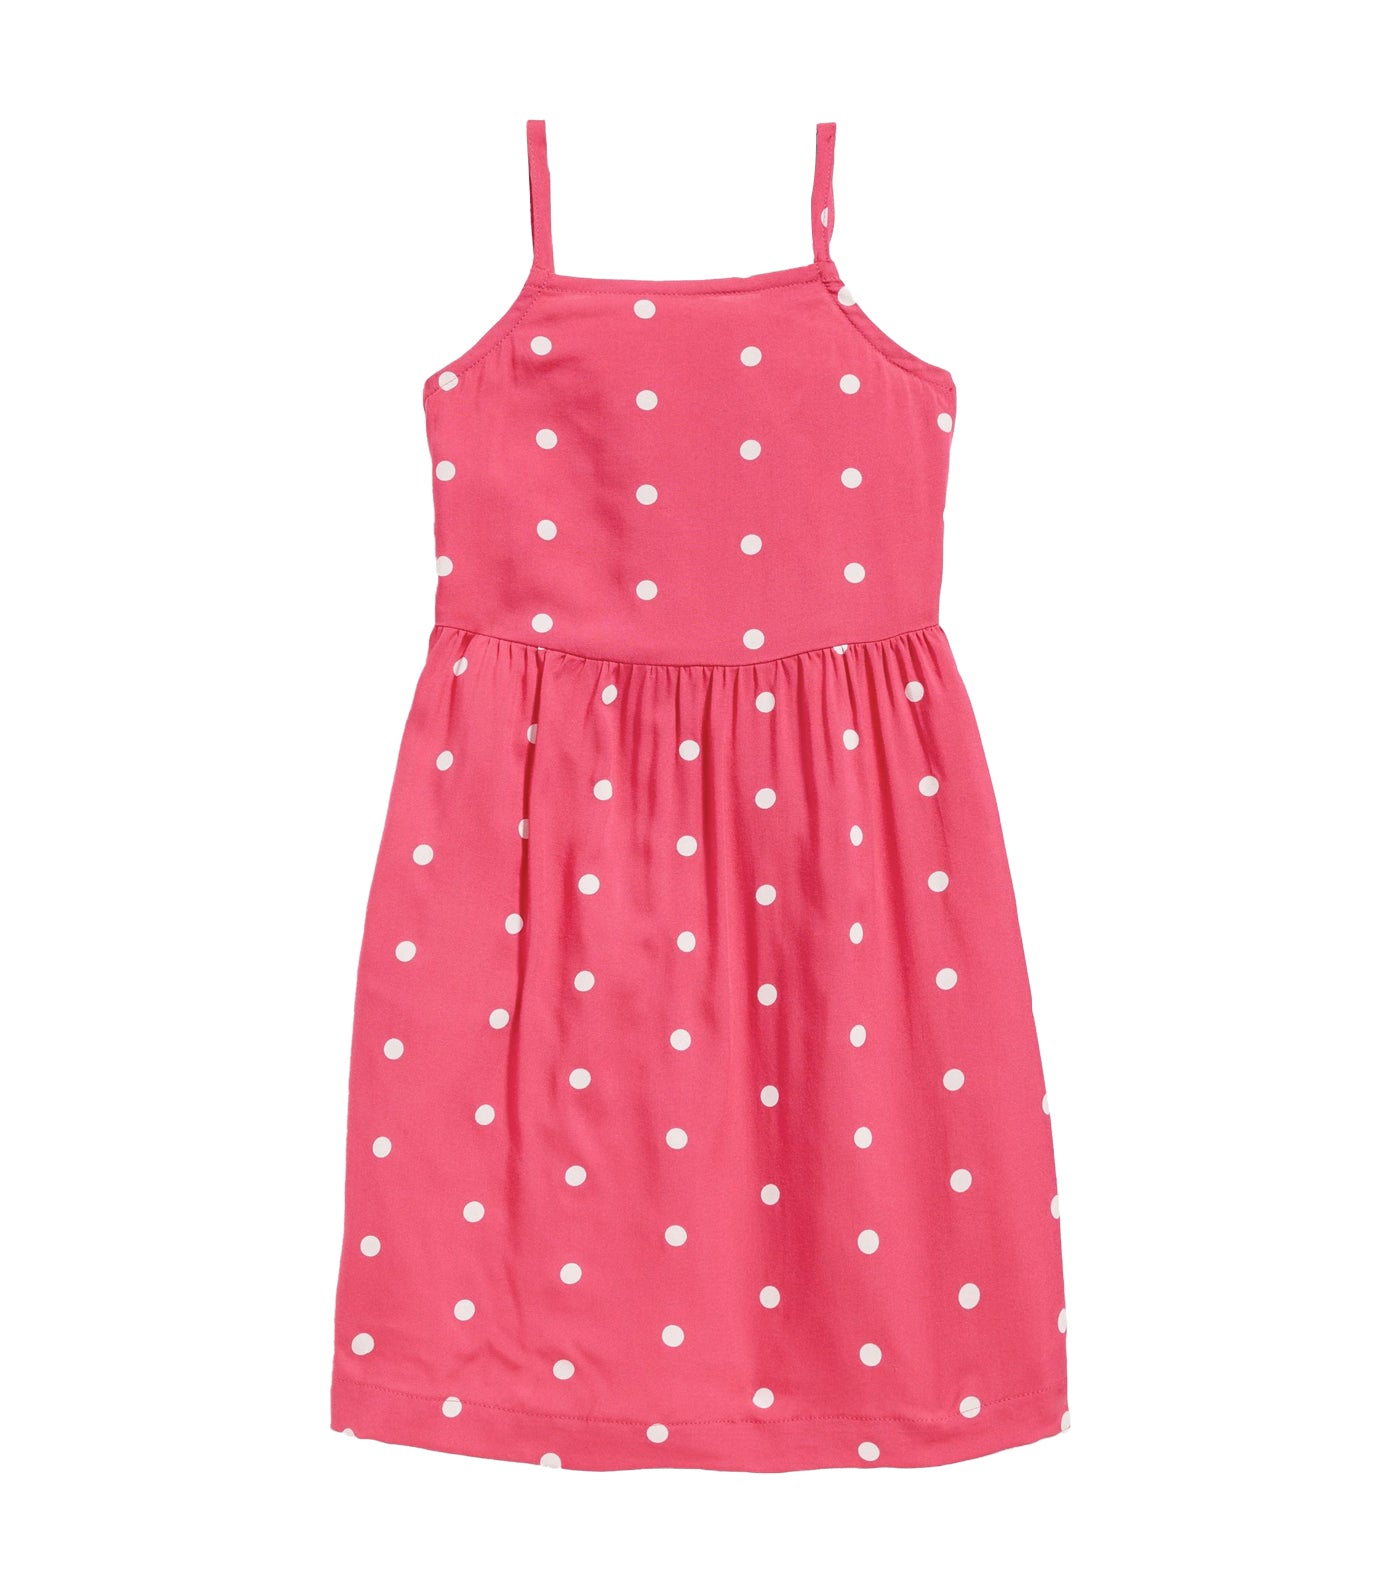 Printed Fit & Flare Cami Dress for Girls Pink Dots